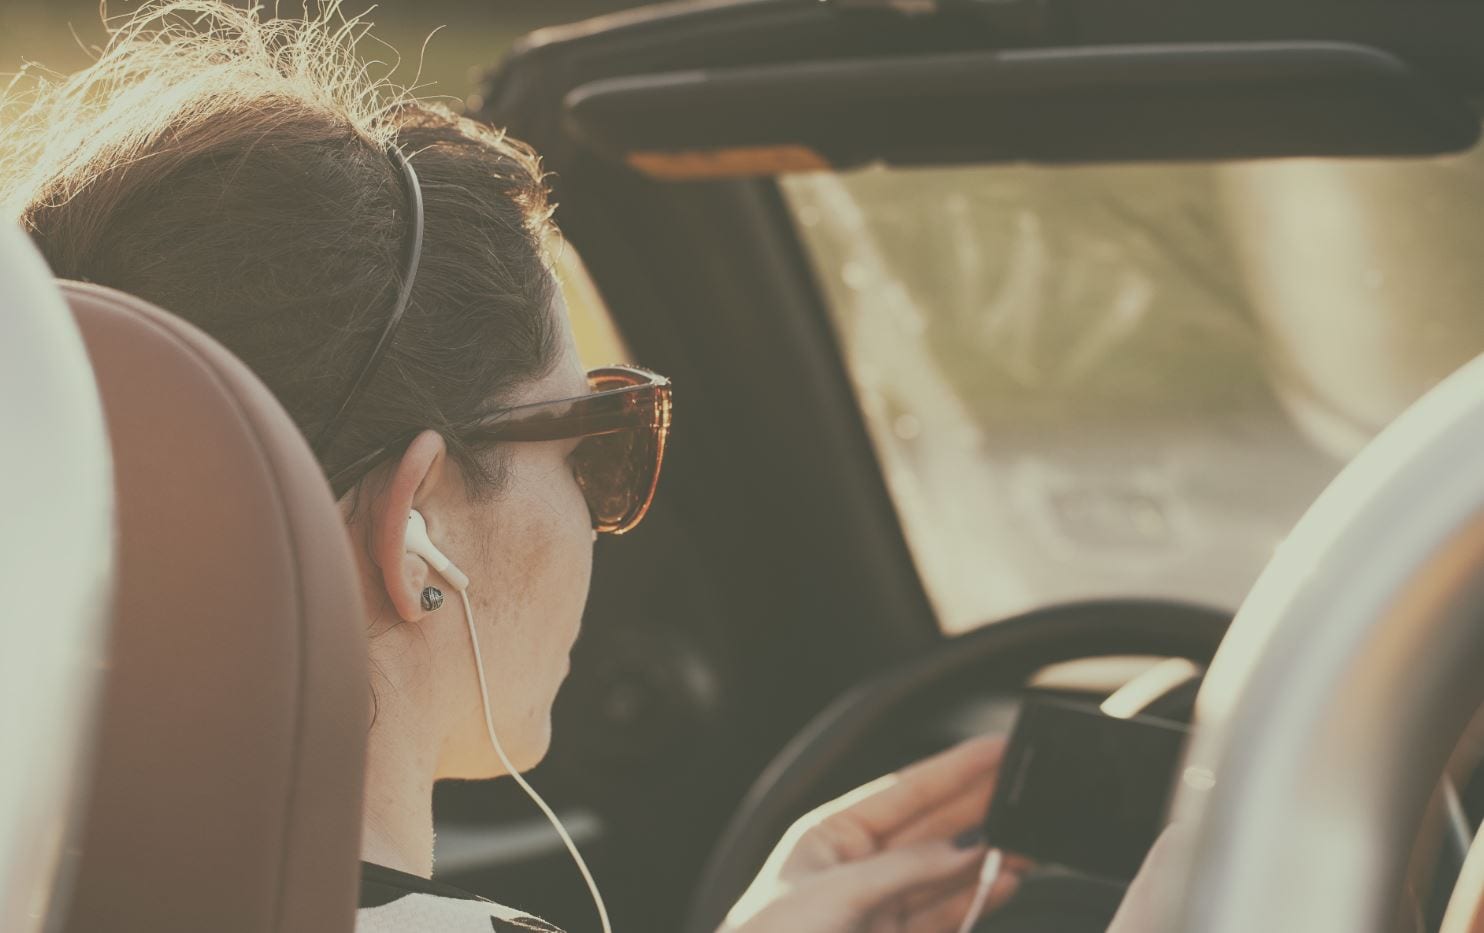 Can I use headphones when driving?